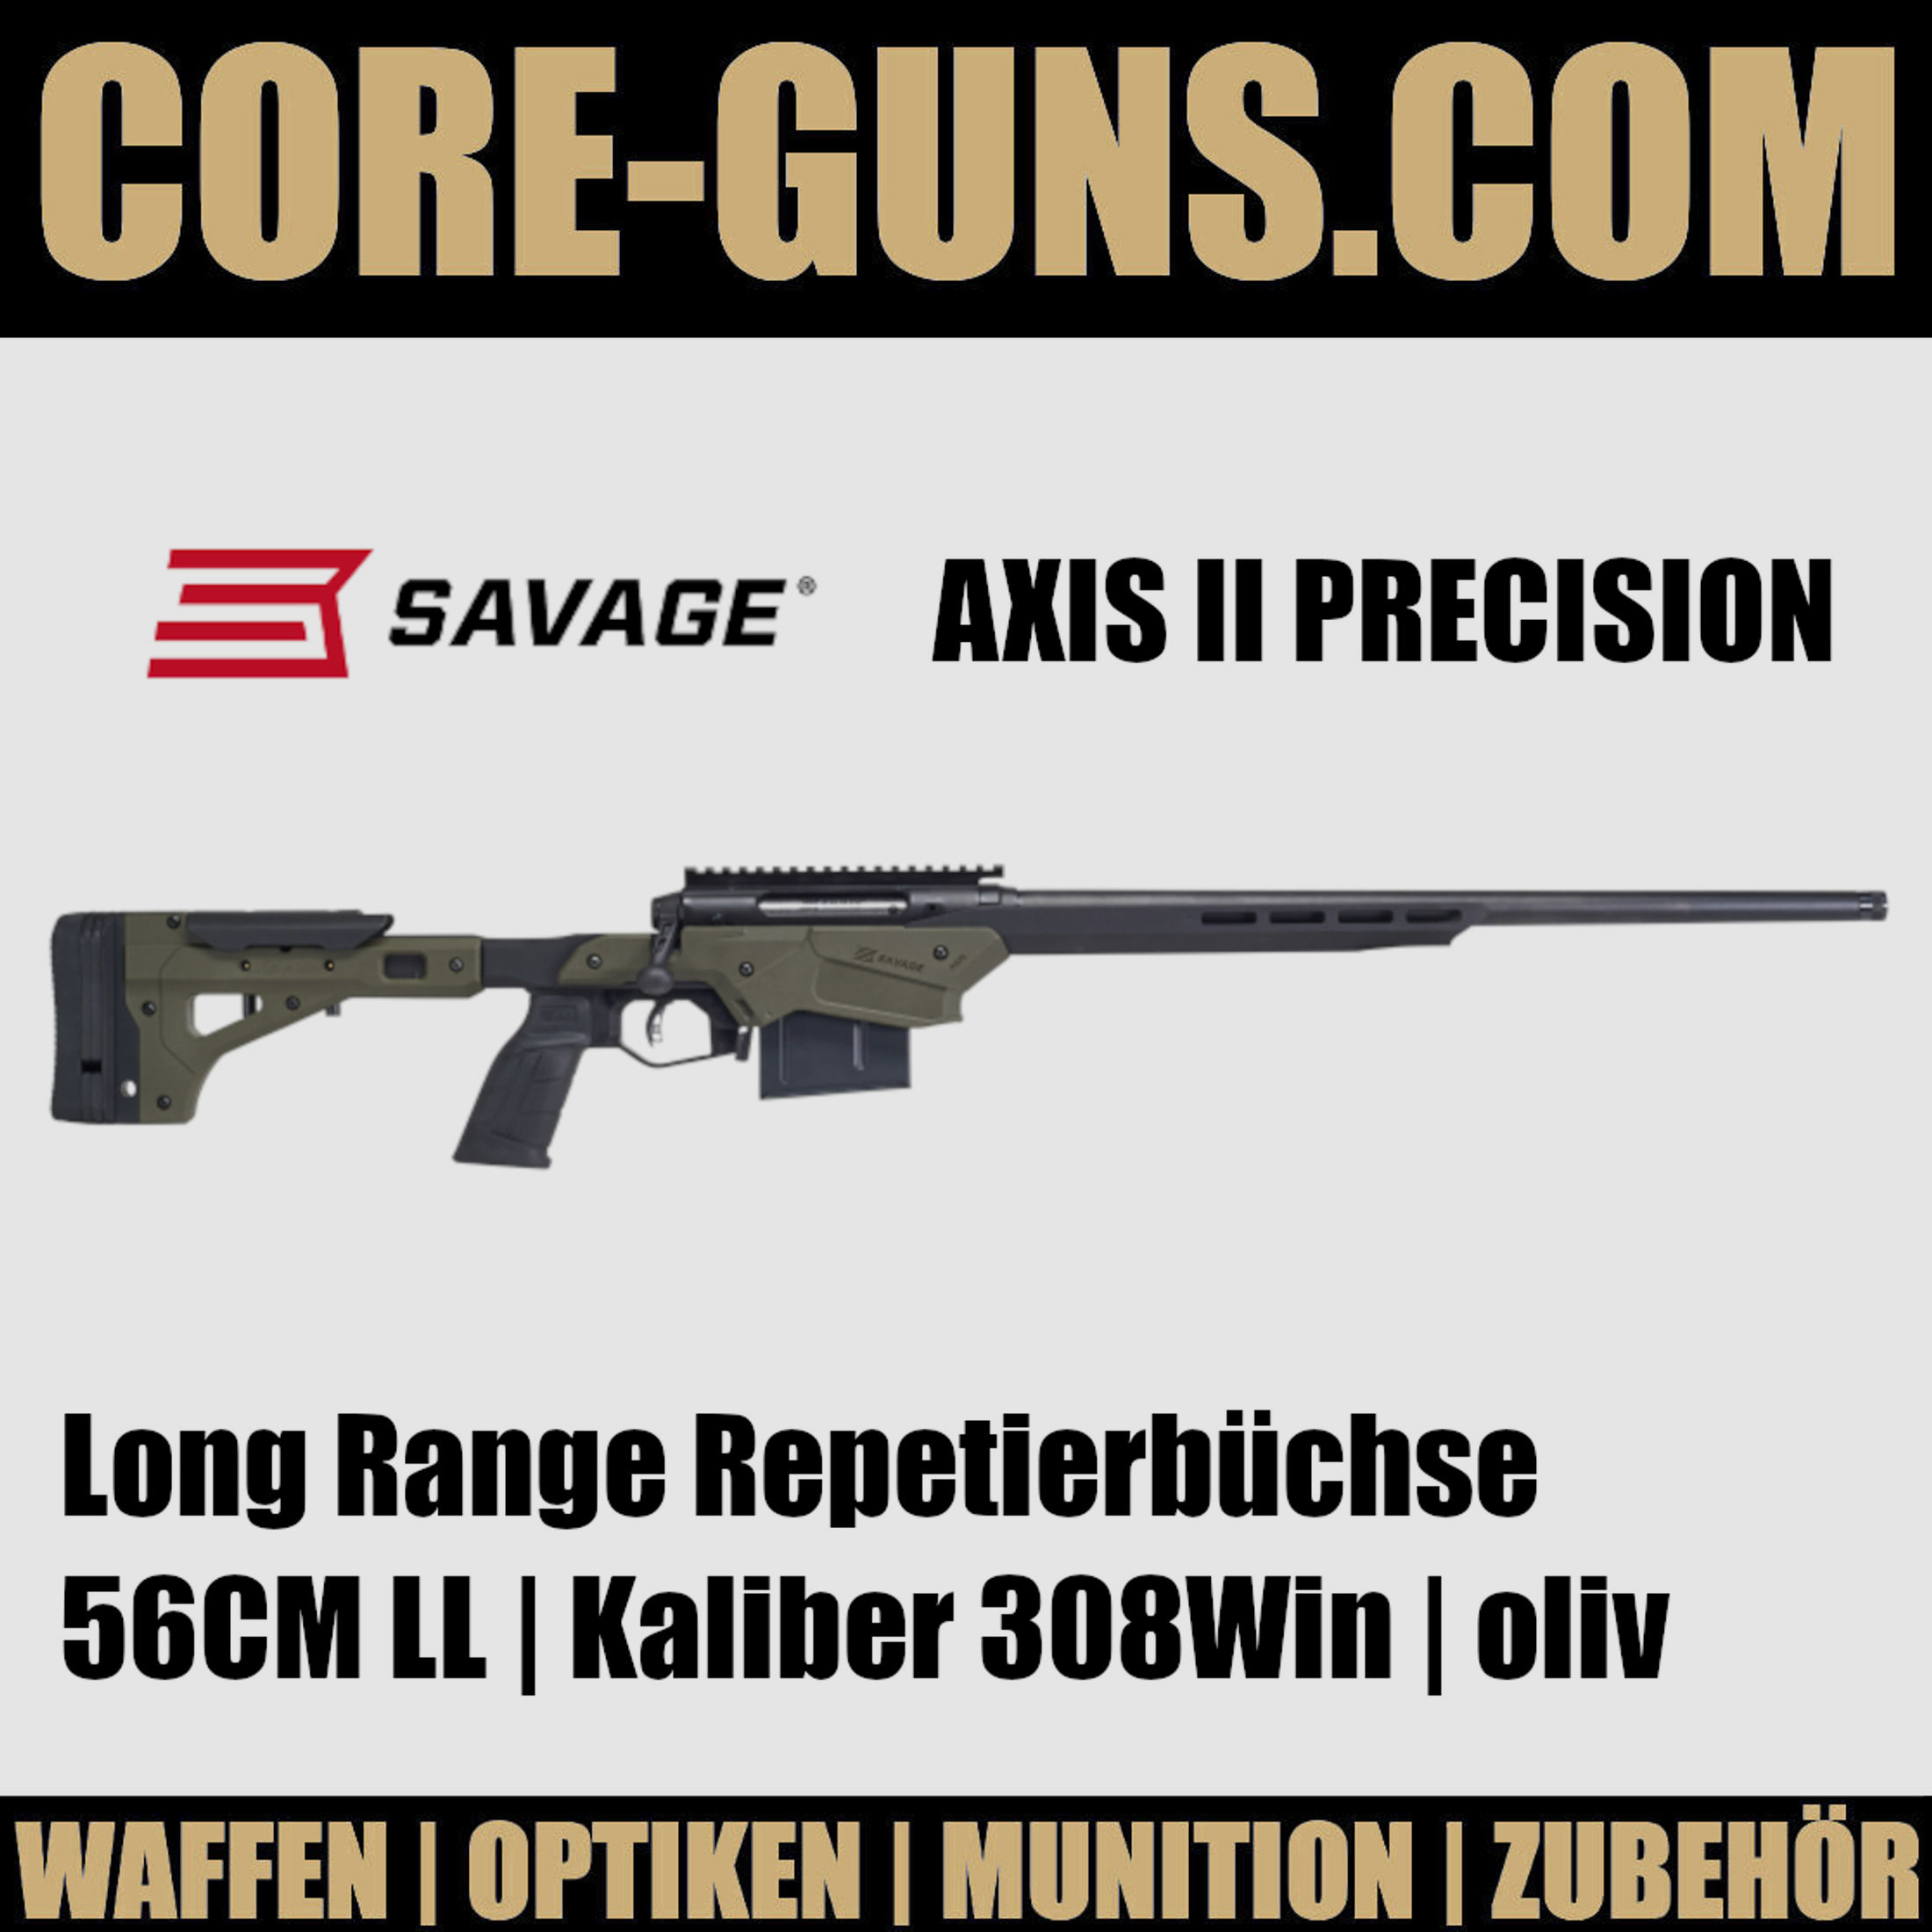 Savage Arms AXIS II PRECISION Savage Axis 2 Precision 56cm LL, 308Win, Repetierbüchse oliv UVP: 1399